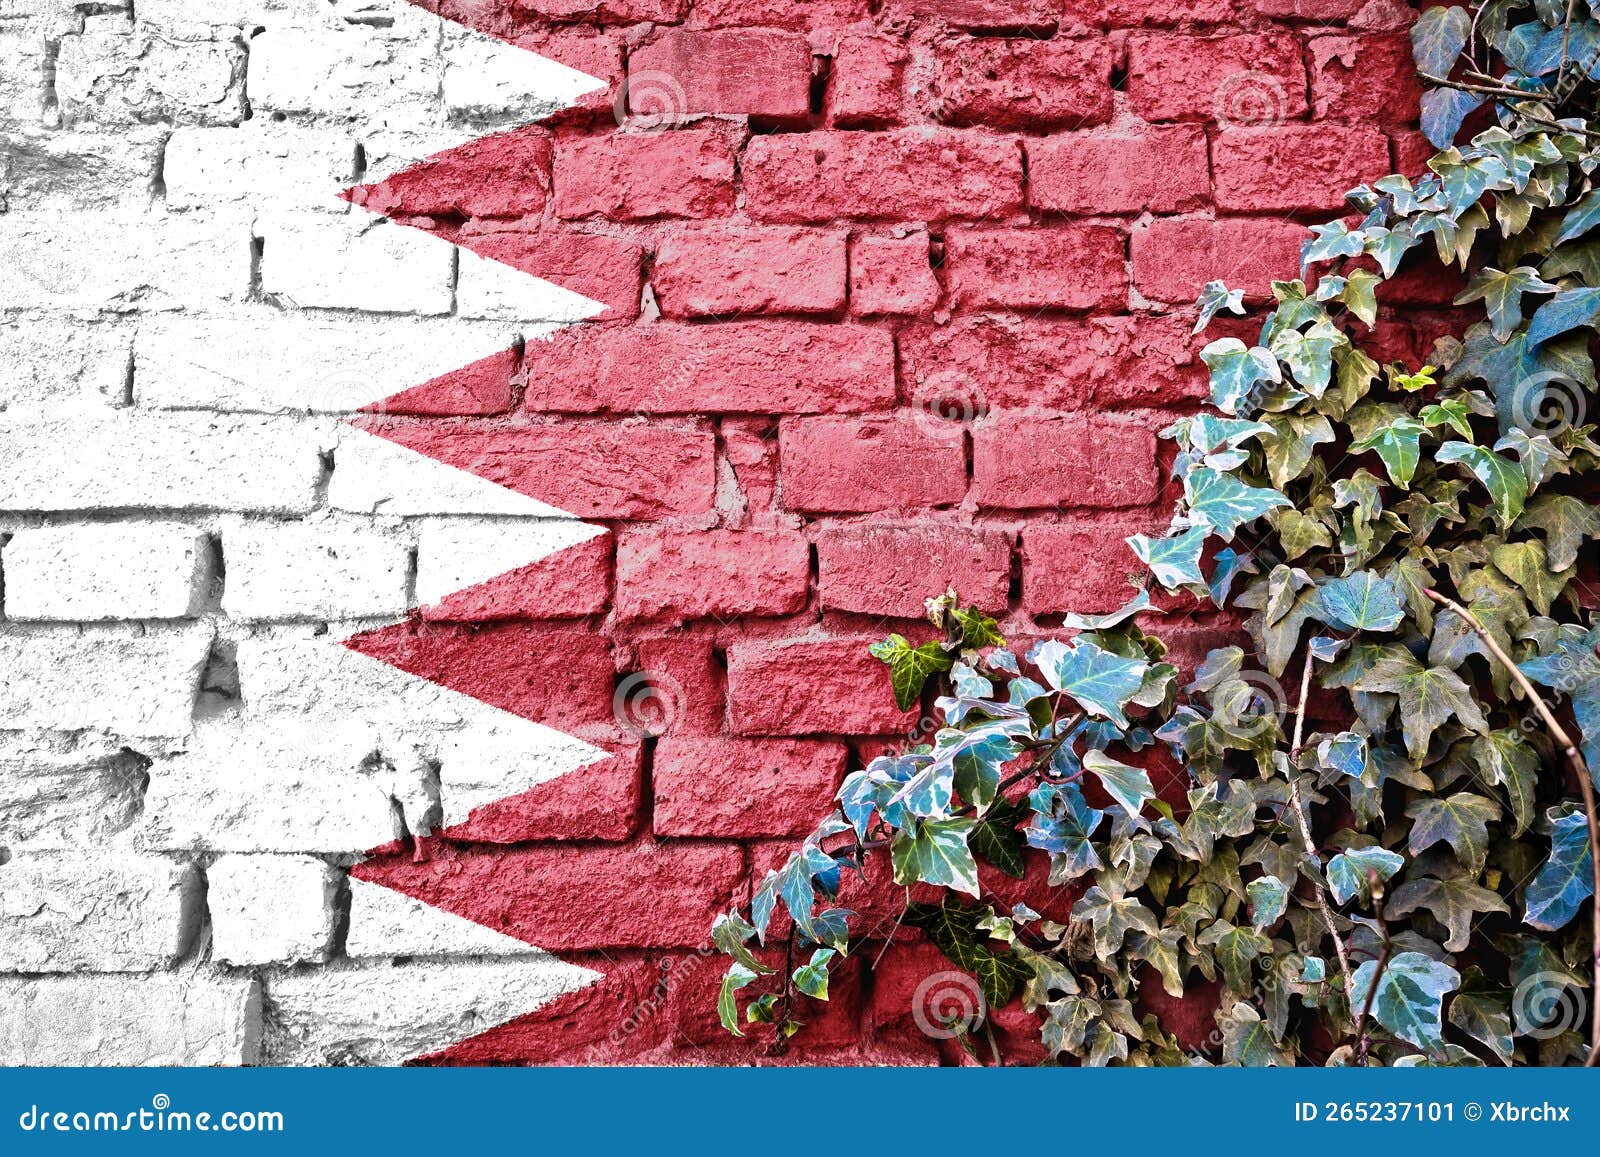 bahrein grunge flag on brick wall with ivy plant